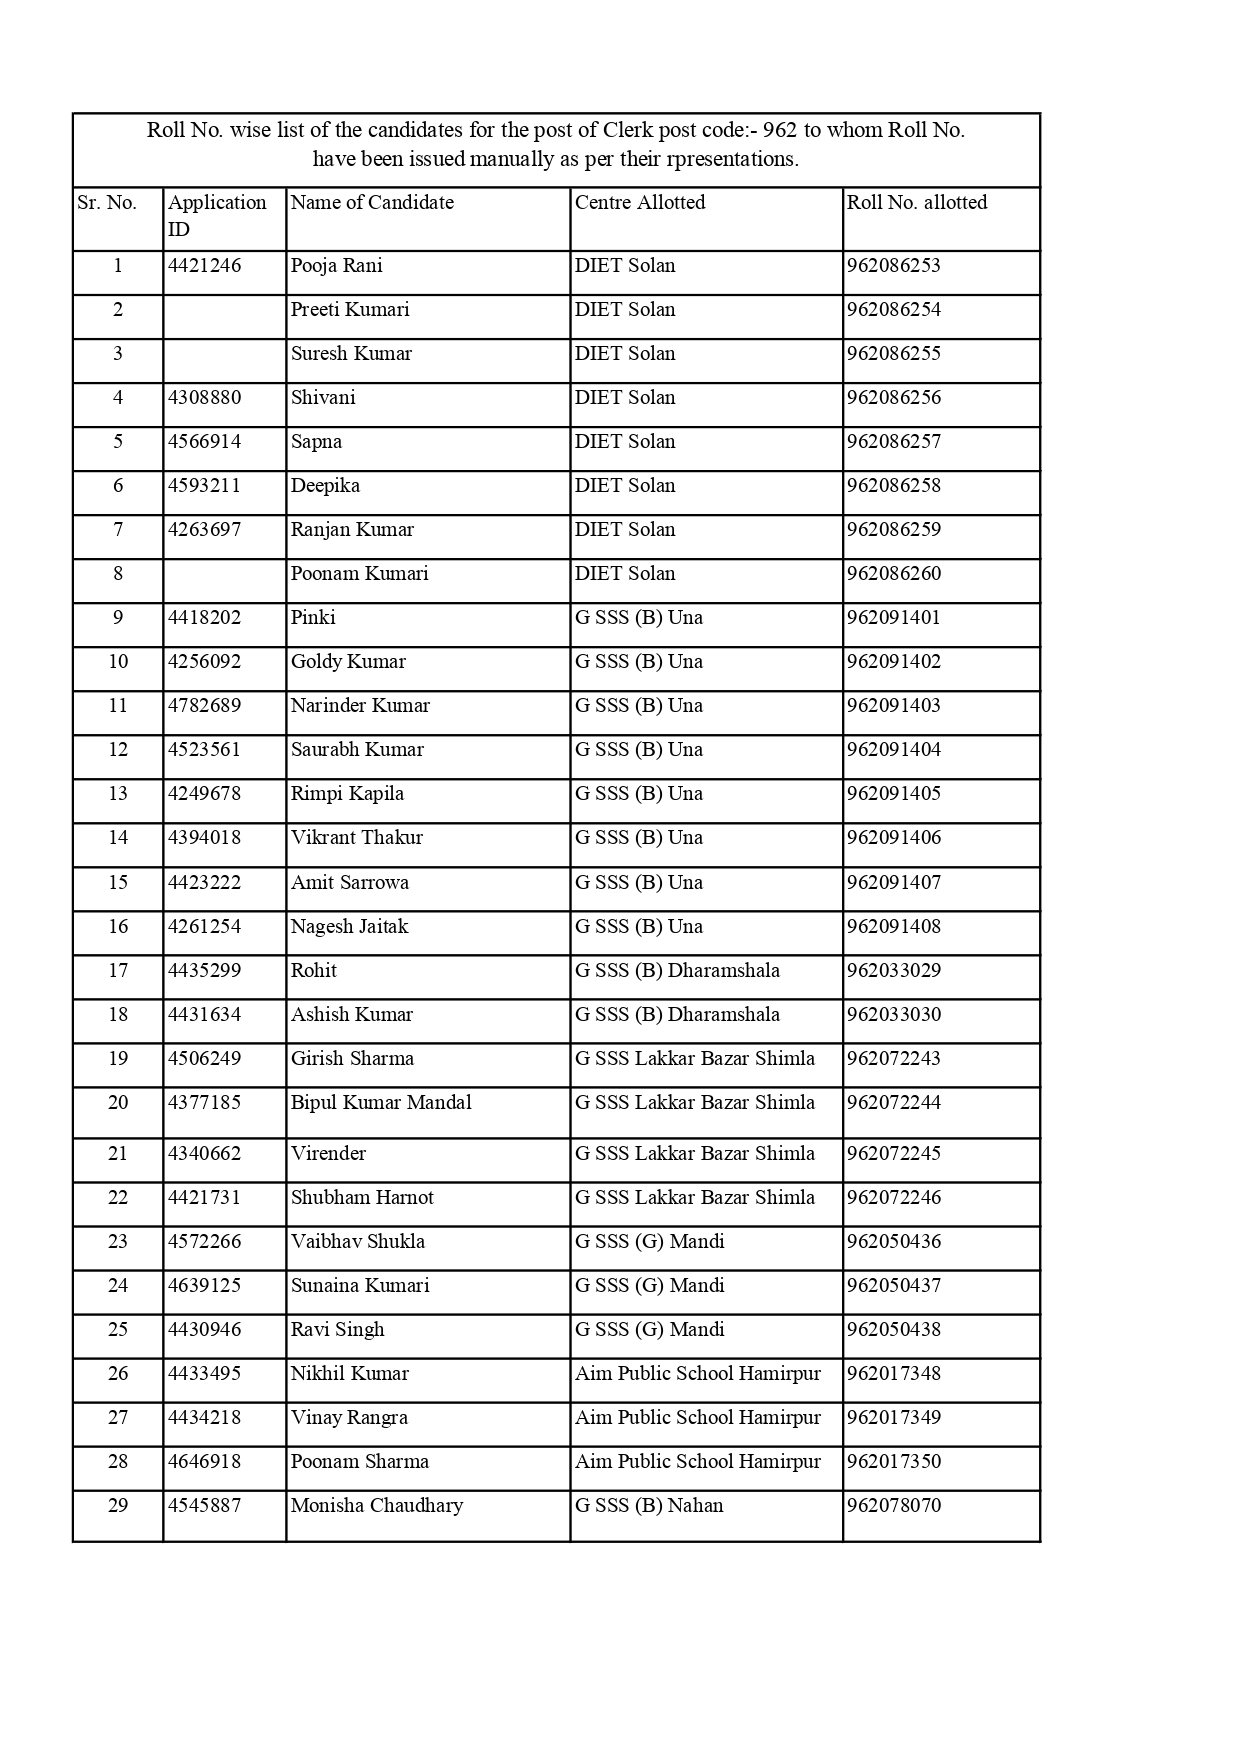 Roll No. wise list of the candidates for the post of Clerk post code:- 962 to whom Roll No. have been issued manually as per their rpresentations.:-HPSSC Hamirpur